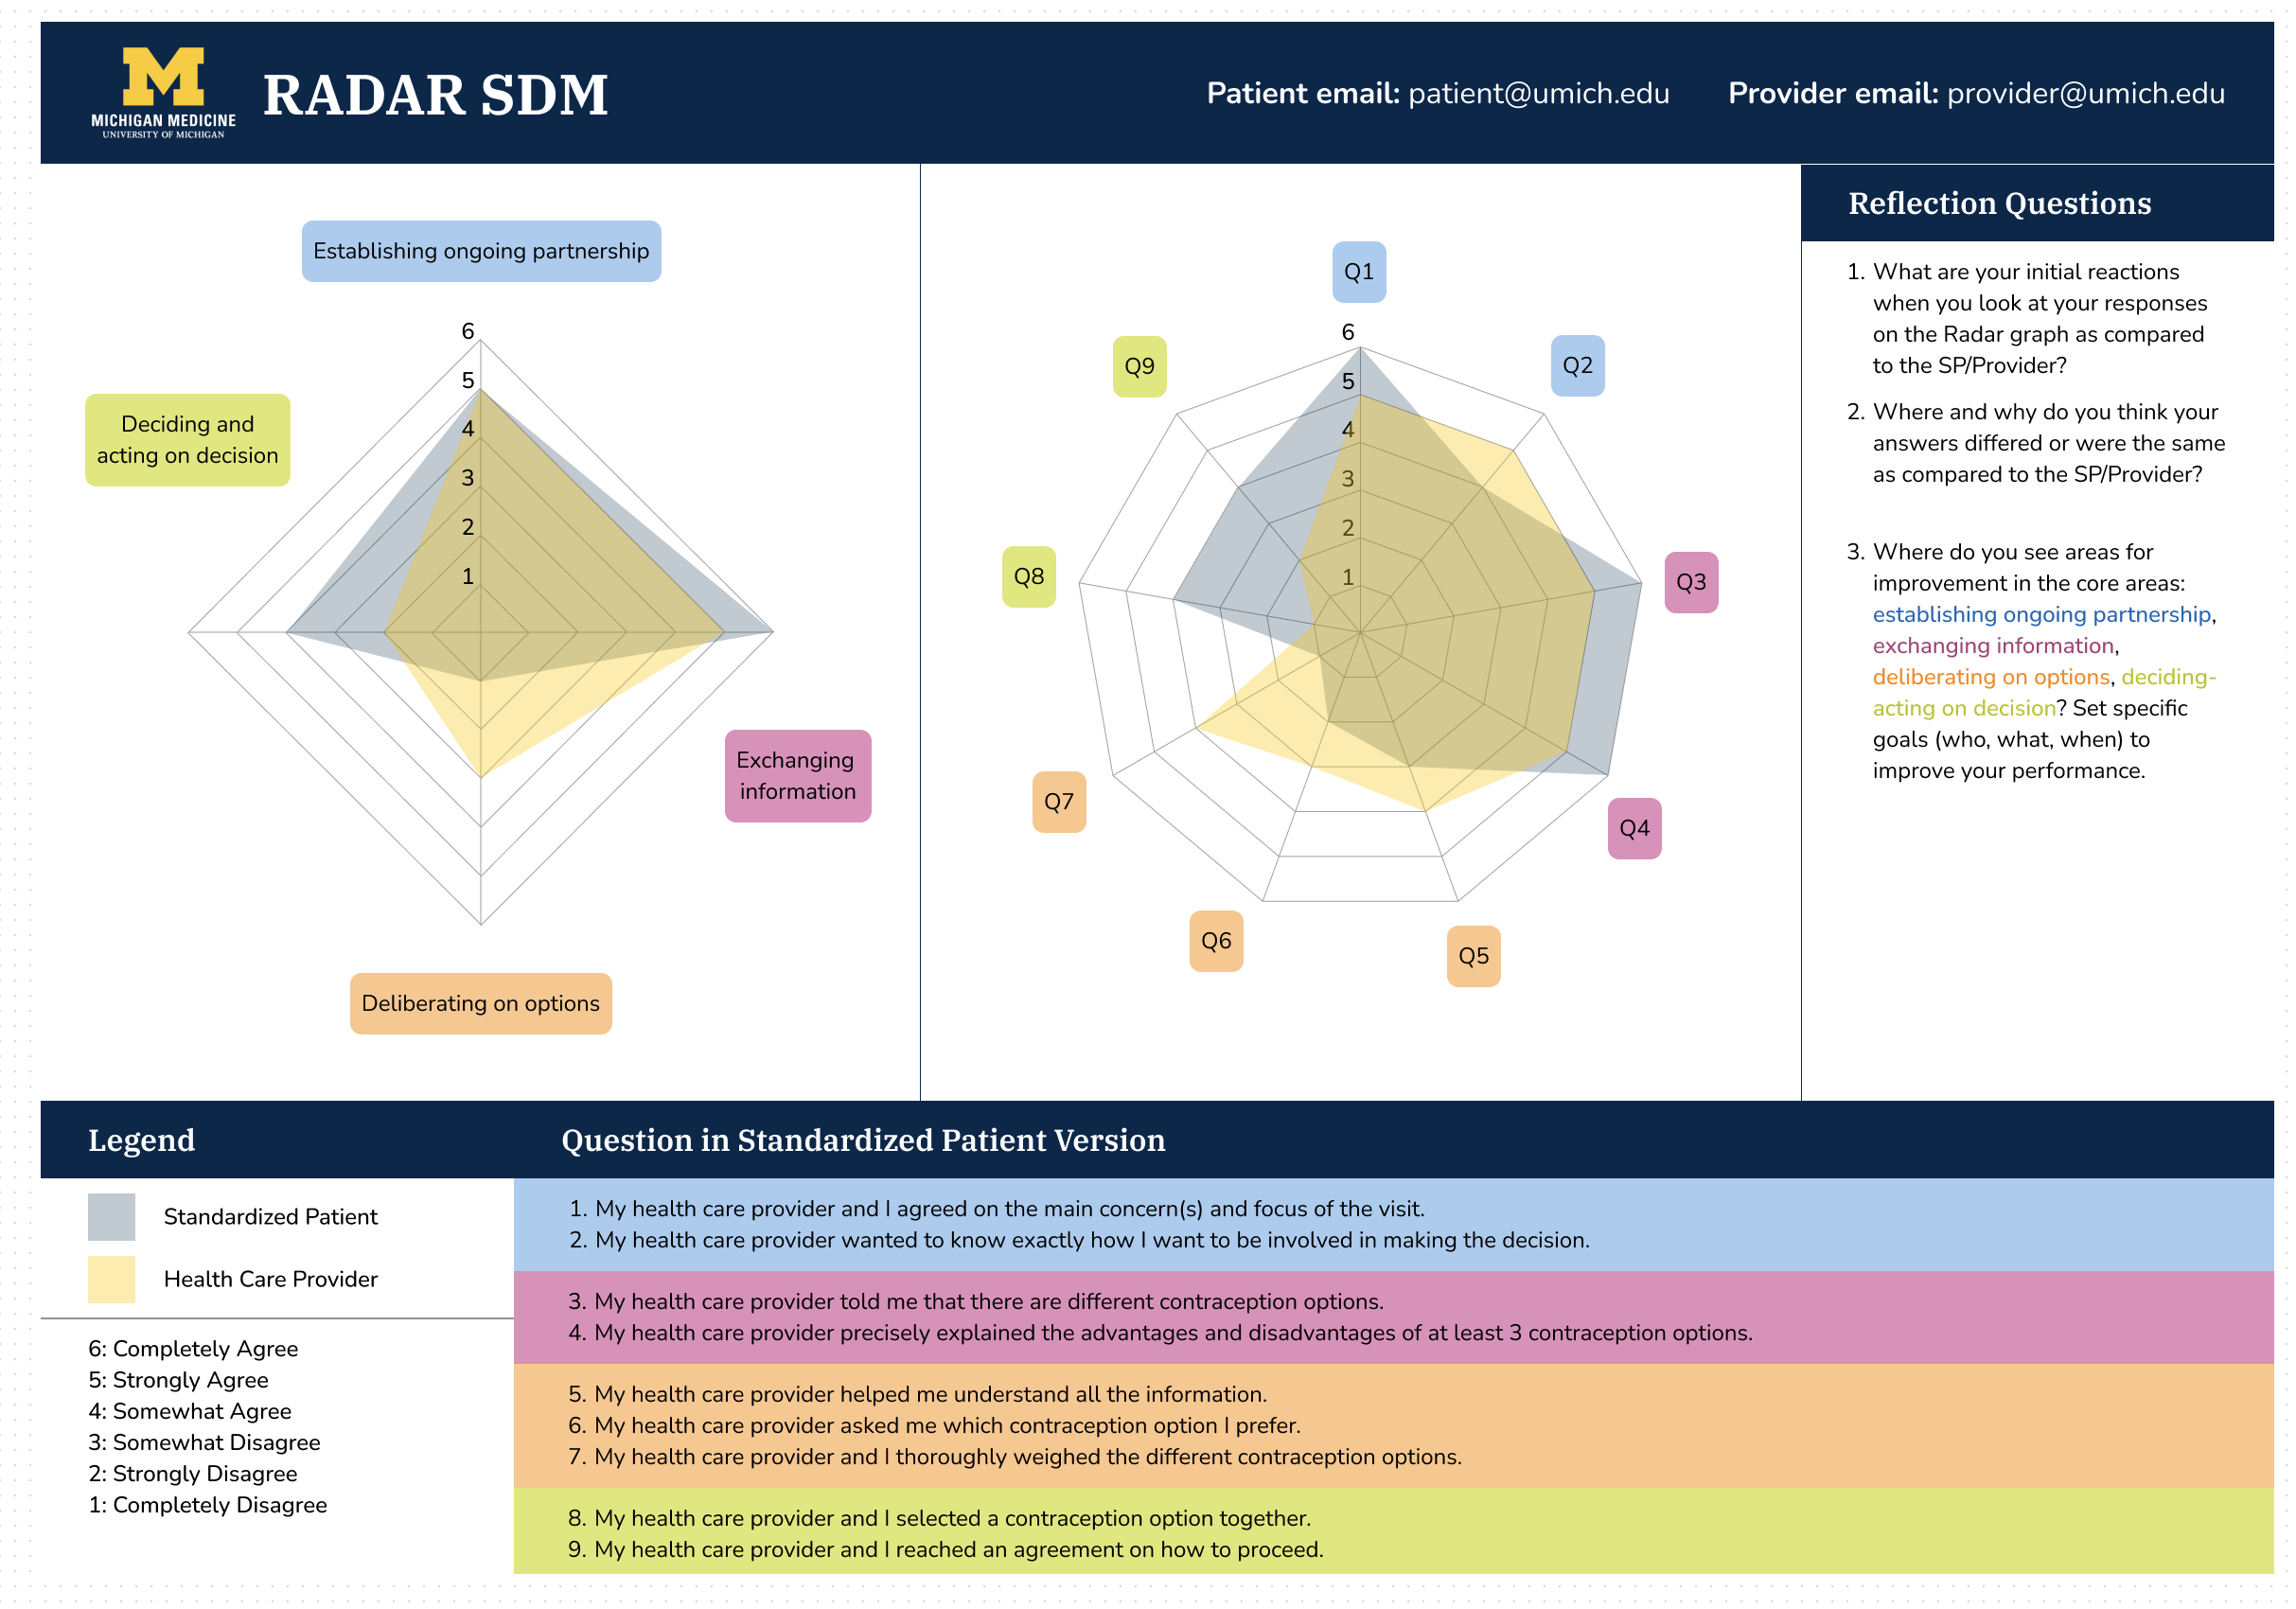 An example of the Radar shared decision-making map. It shows a series of questions and how the responses to those questions vary per stakeholder.